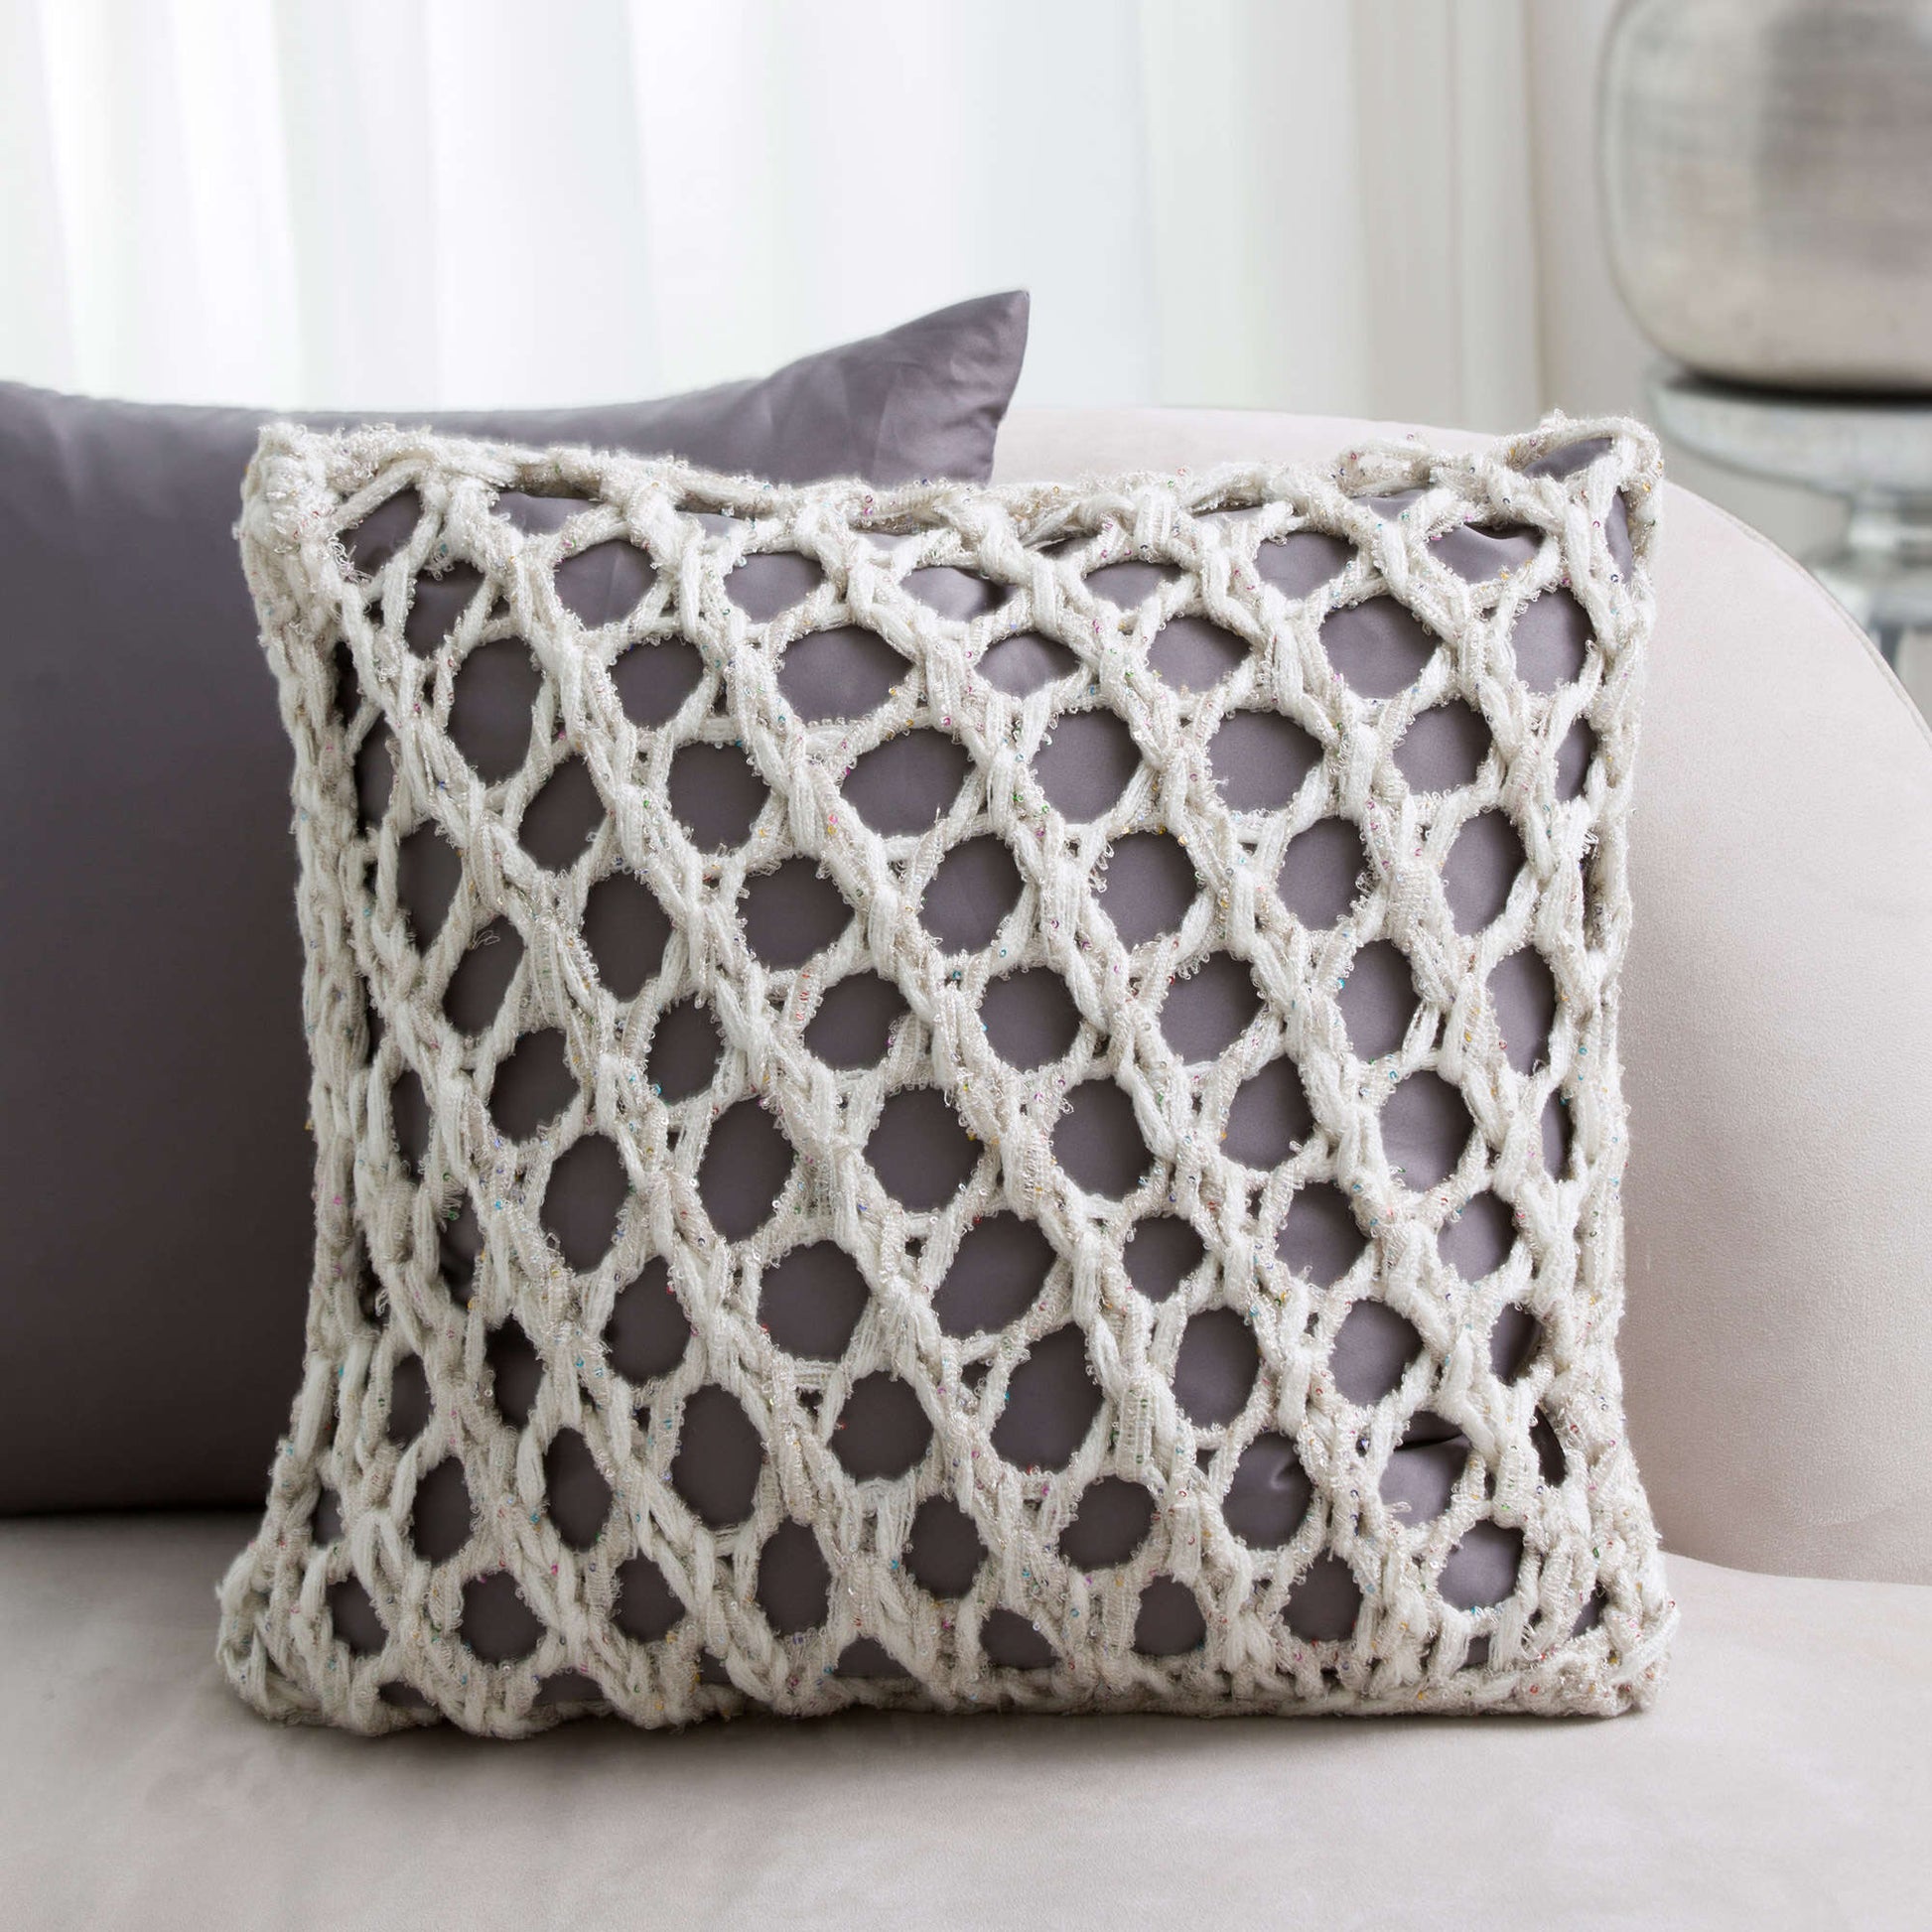 Free Red Heart Mesh Pillow Cover Knit Pattern